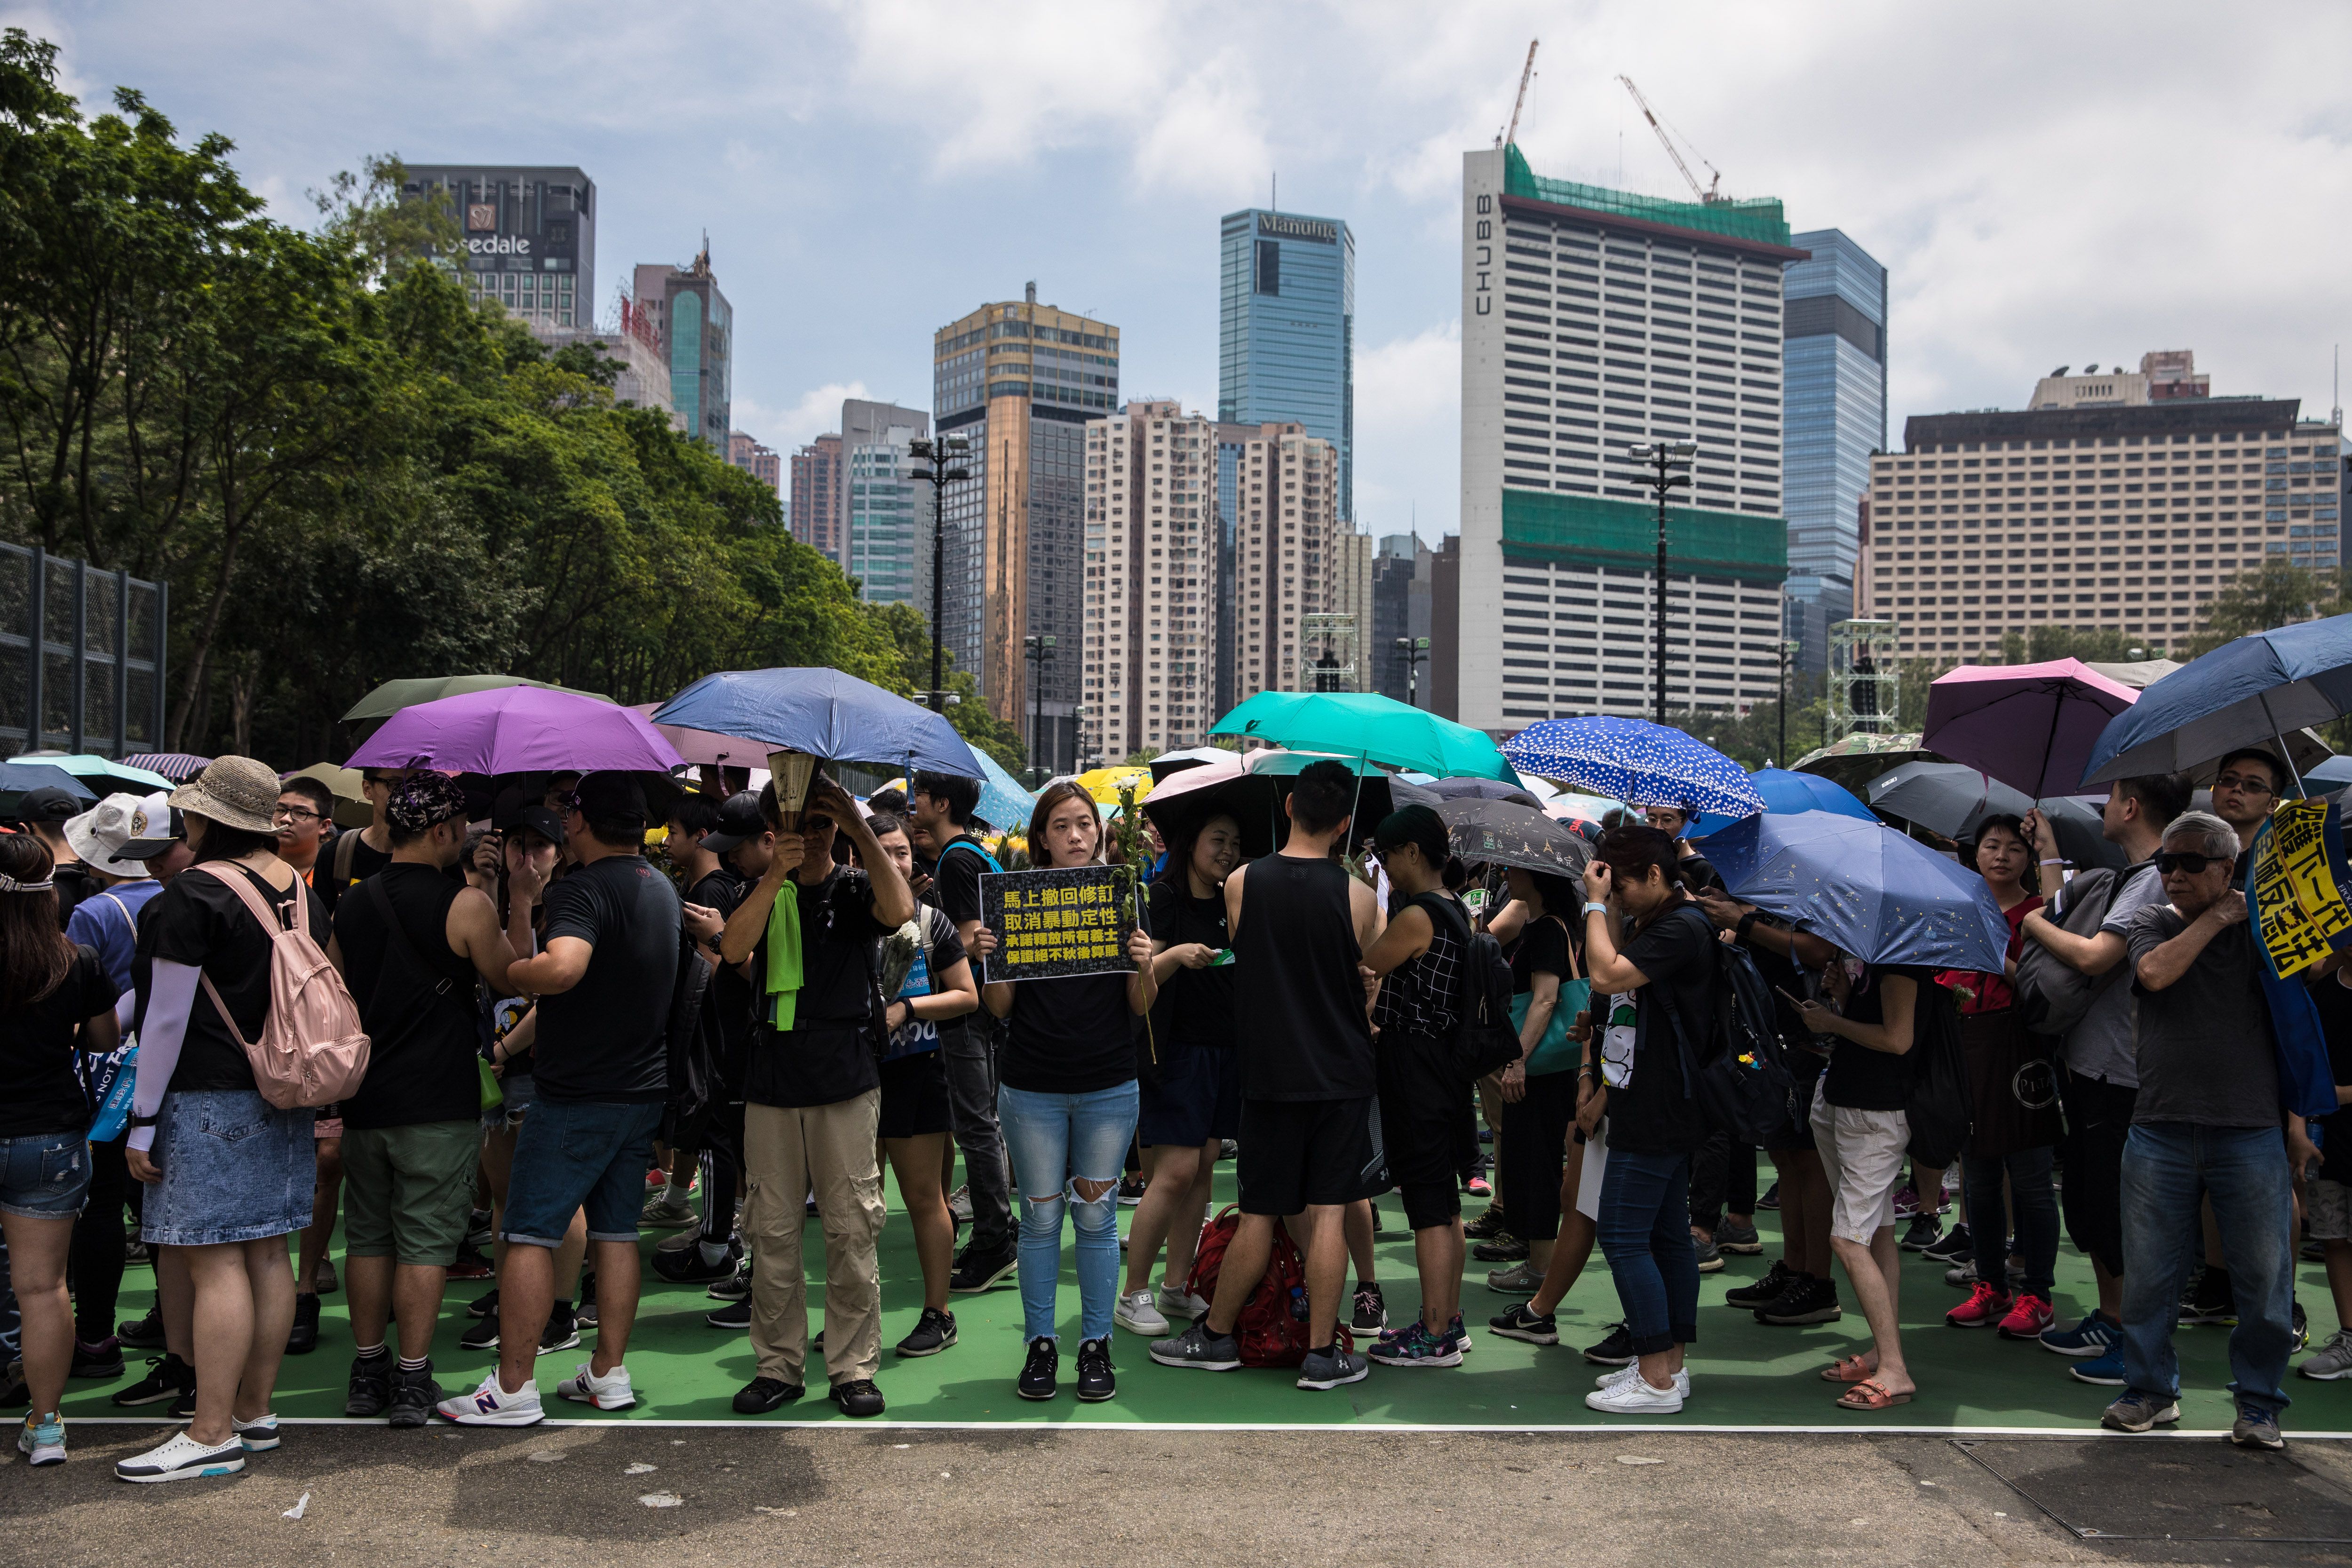 Protesters attend a rally against a controversial extradition law proposal in Hong Kong on June 16, 2019.